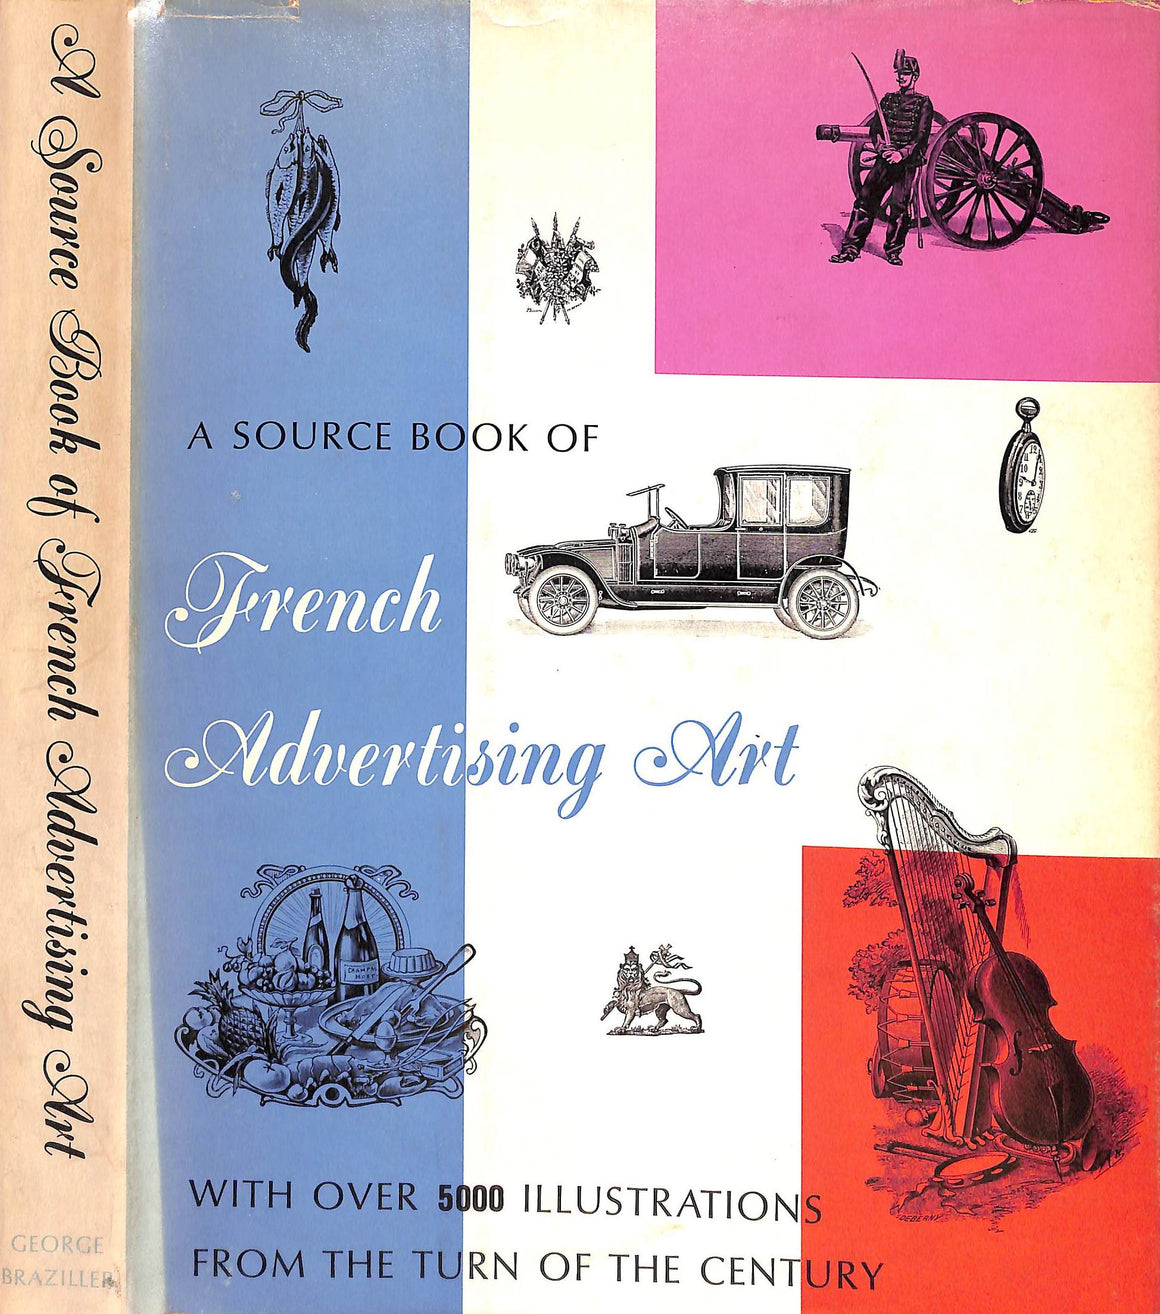 "A Source Book Of French Advertising Art" 1964 ZUCKER, Irving [compiled by]